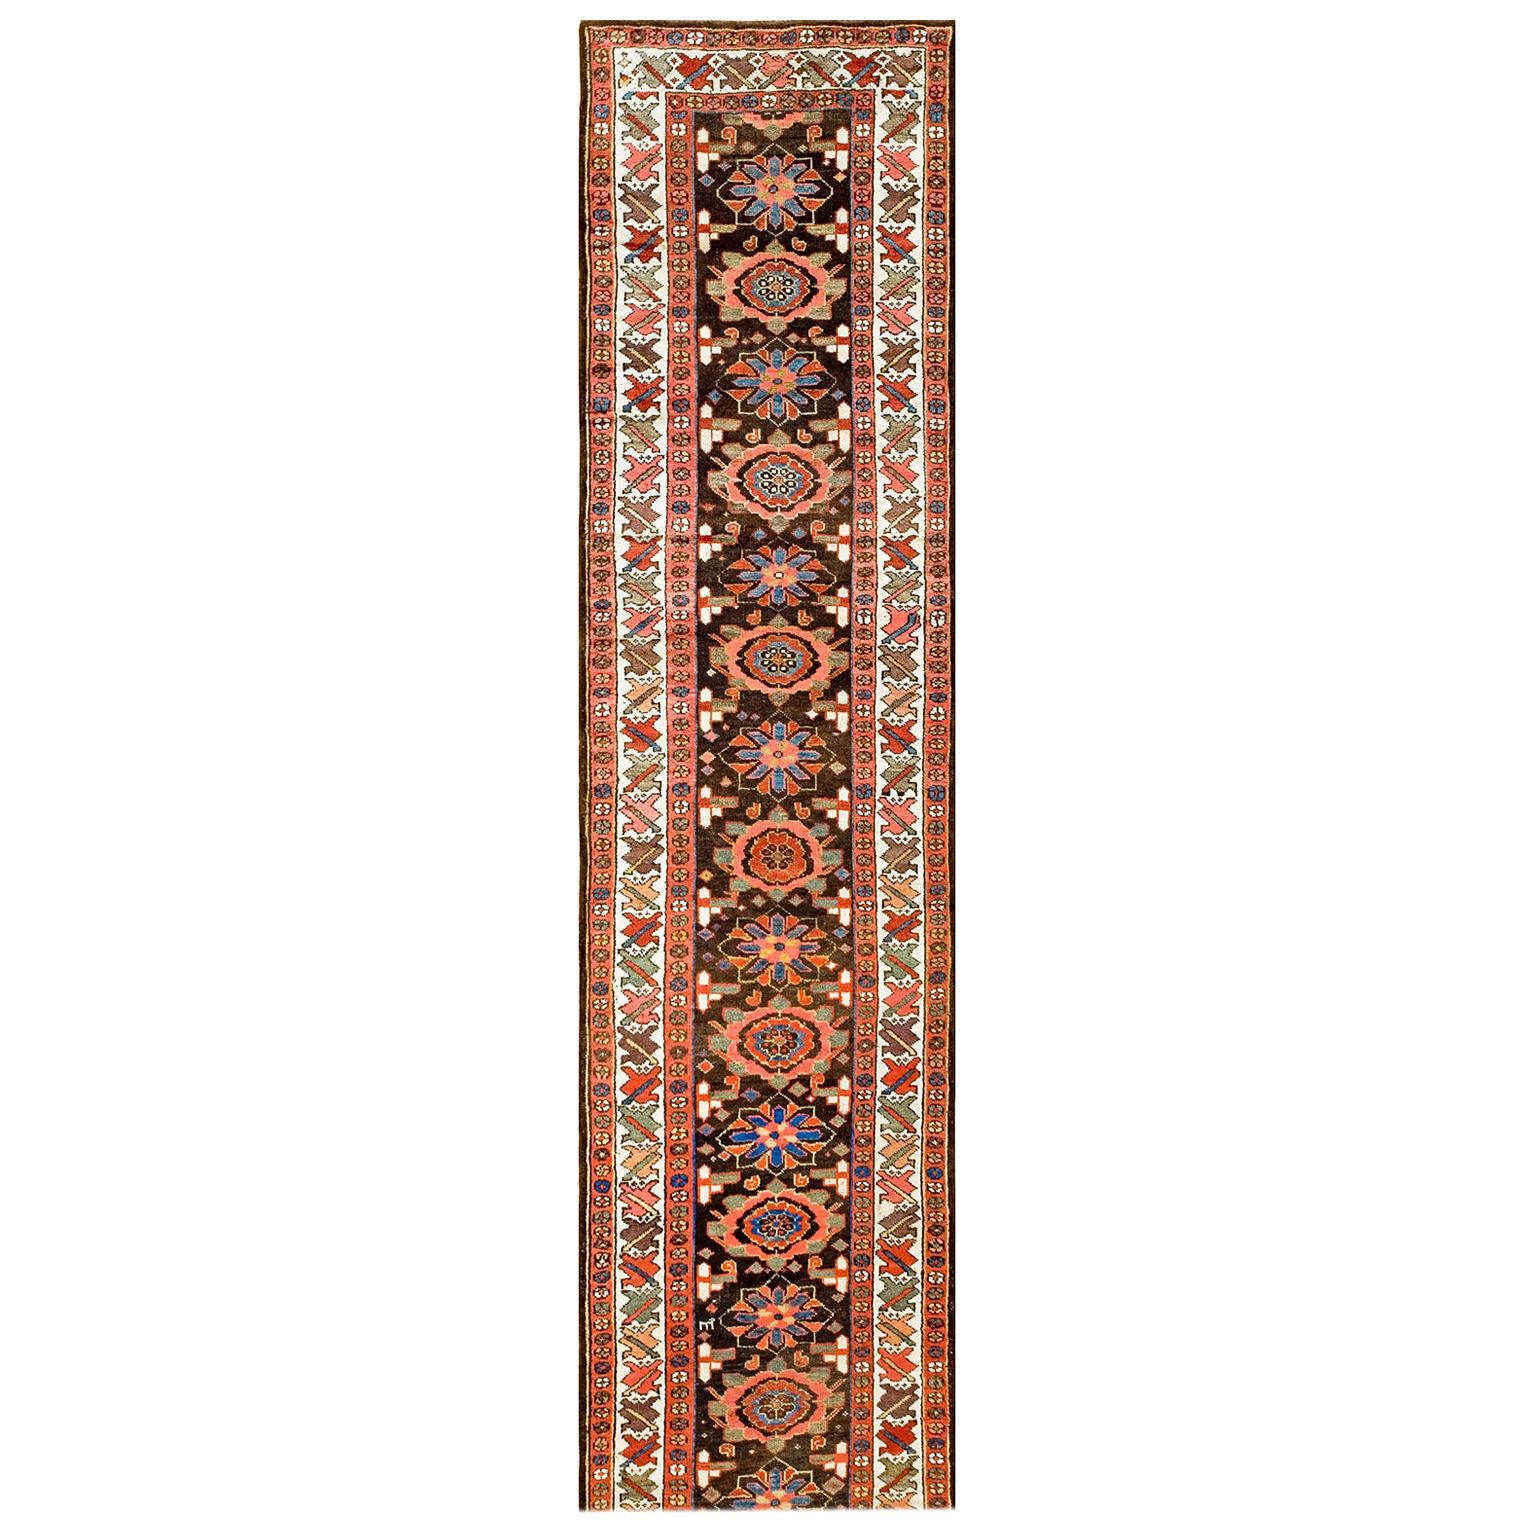 19th Century NW Persian Carpet ( 2'6" x 19'8" - 76 x 600 cm ) For Sale